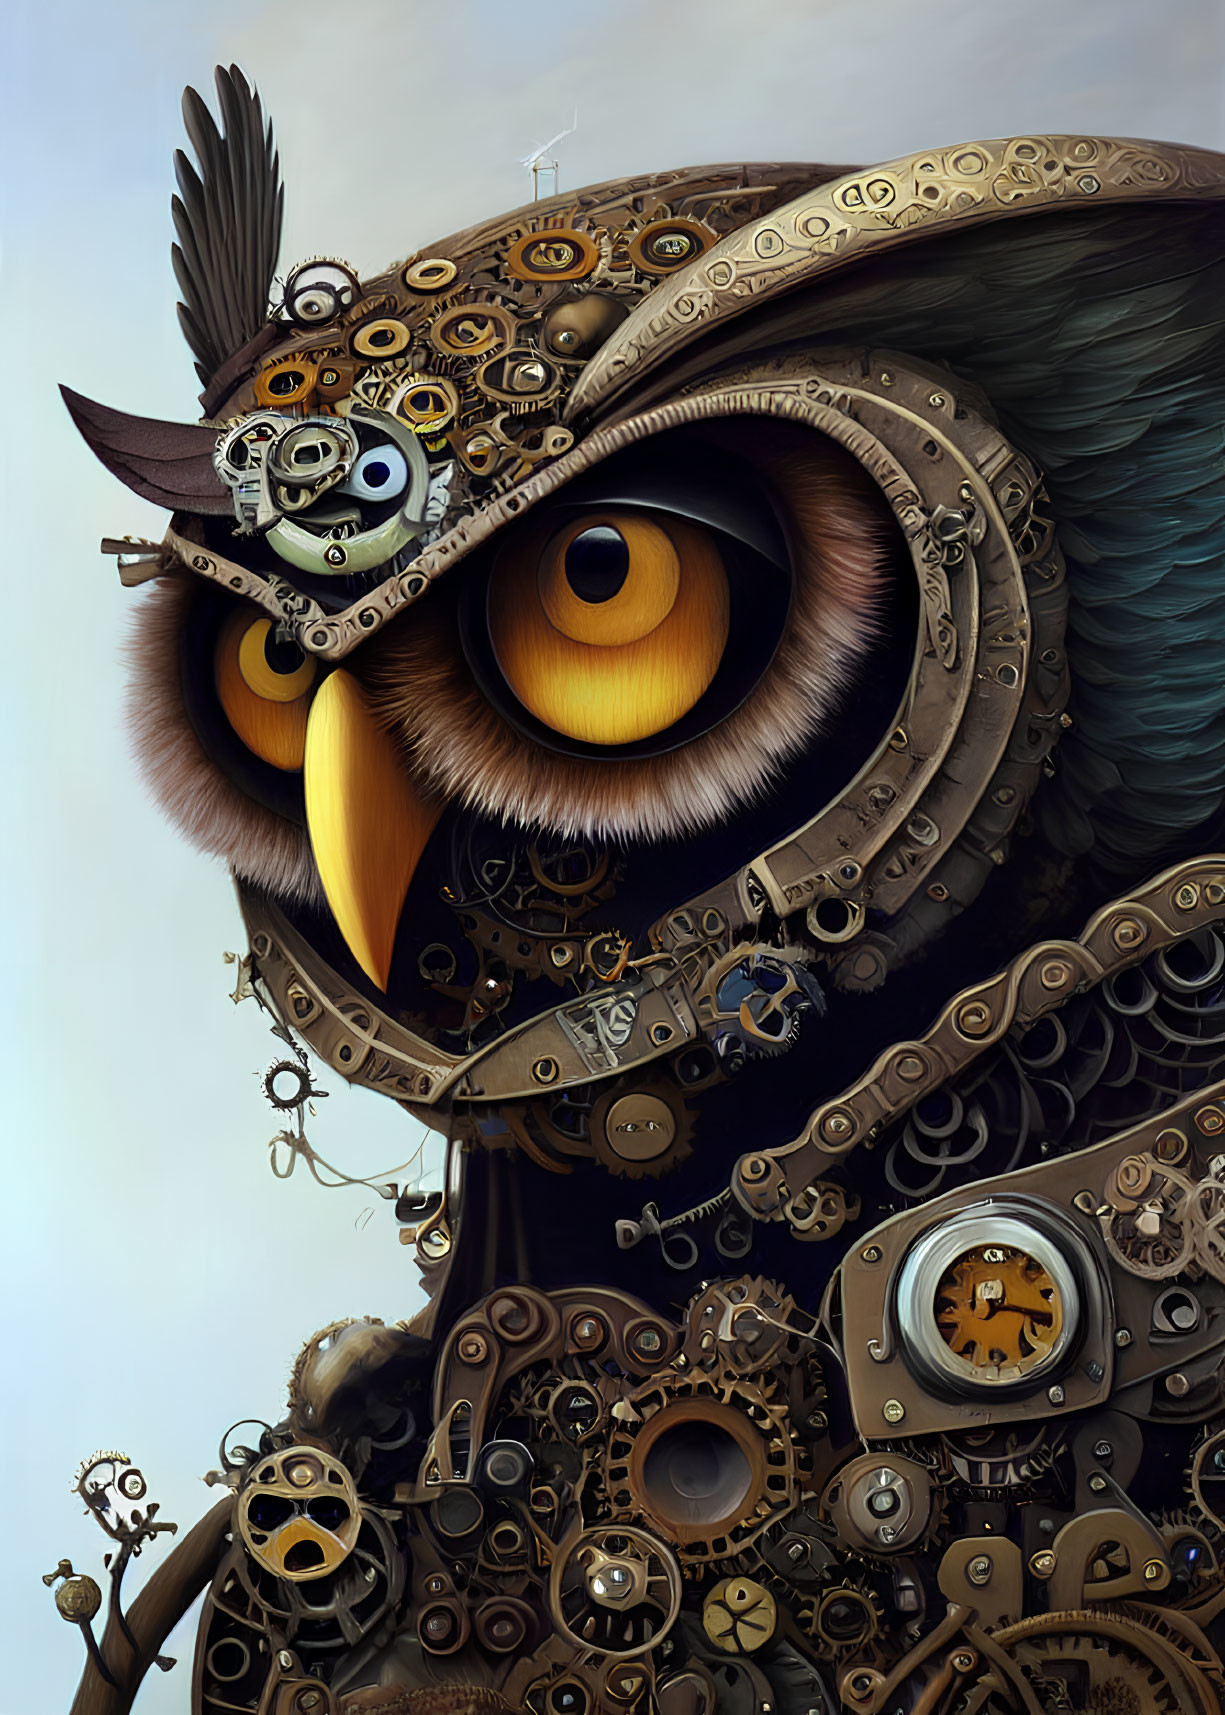 Steampunk-style owl illustration with golden eyes and metallic feathers